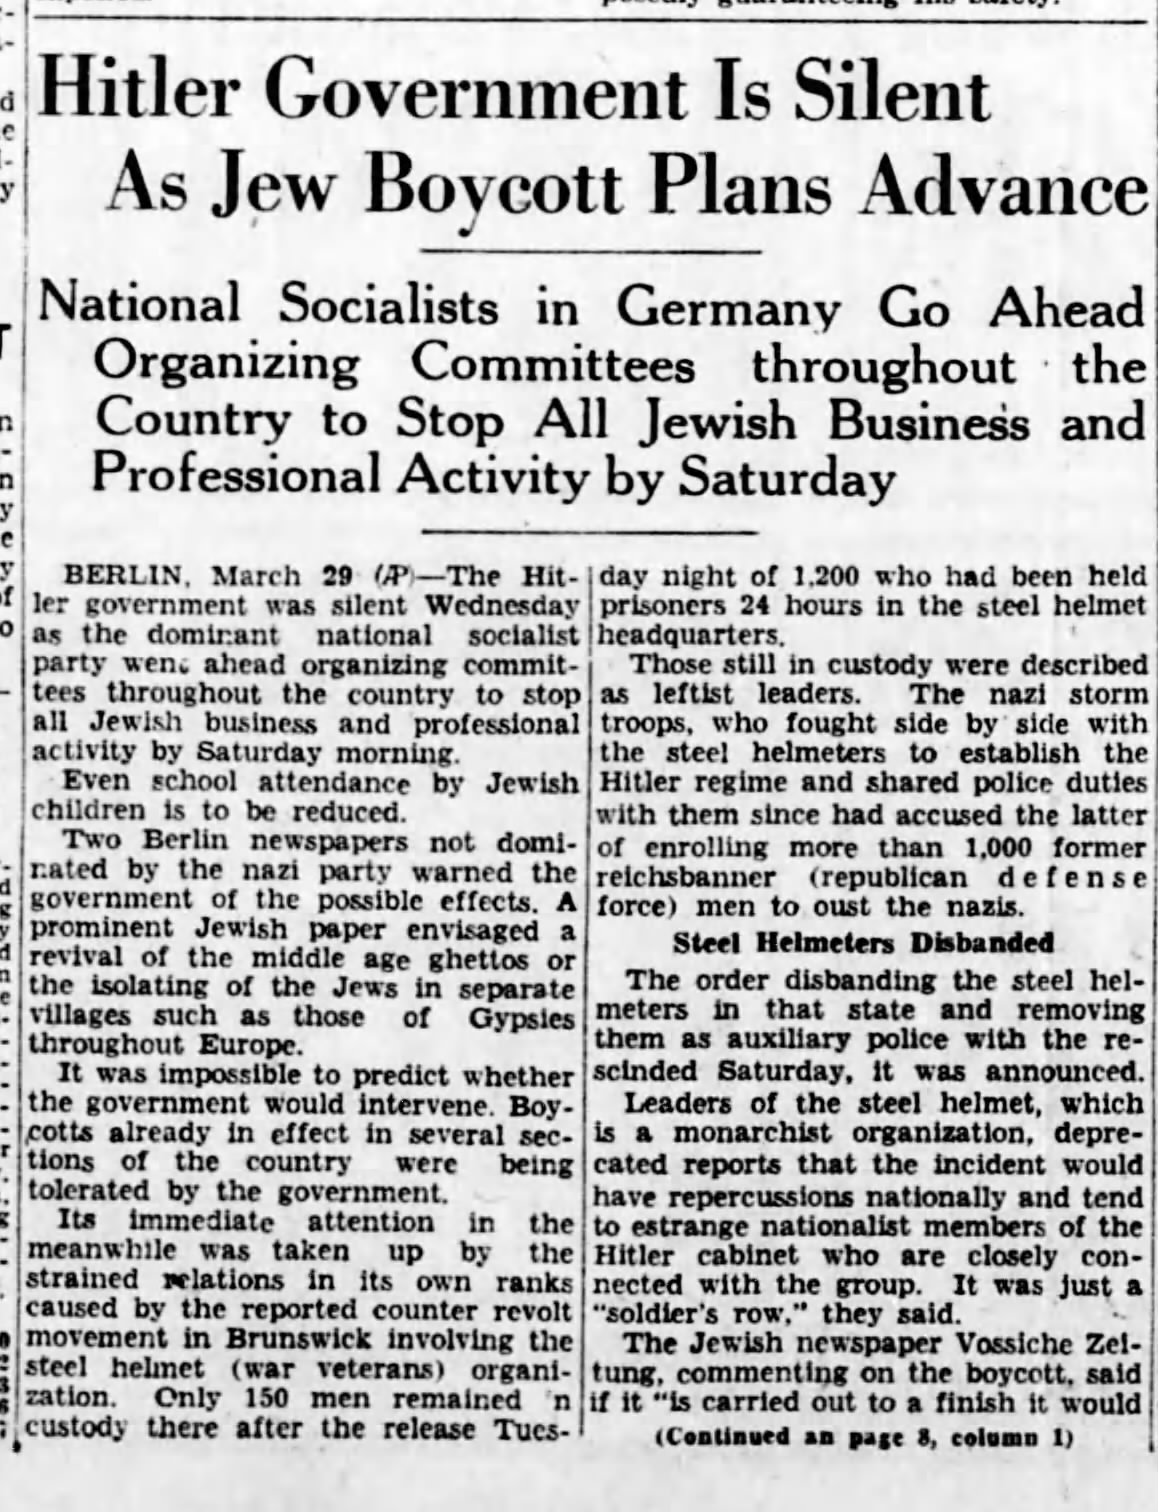 Hitler Government is Silent as Jew Boycott Plans Advance